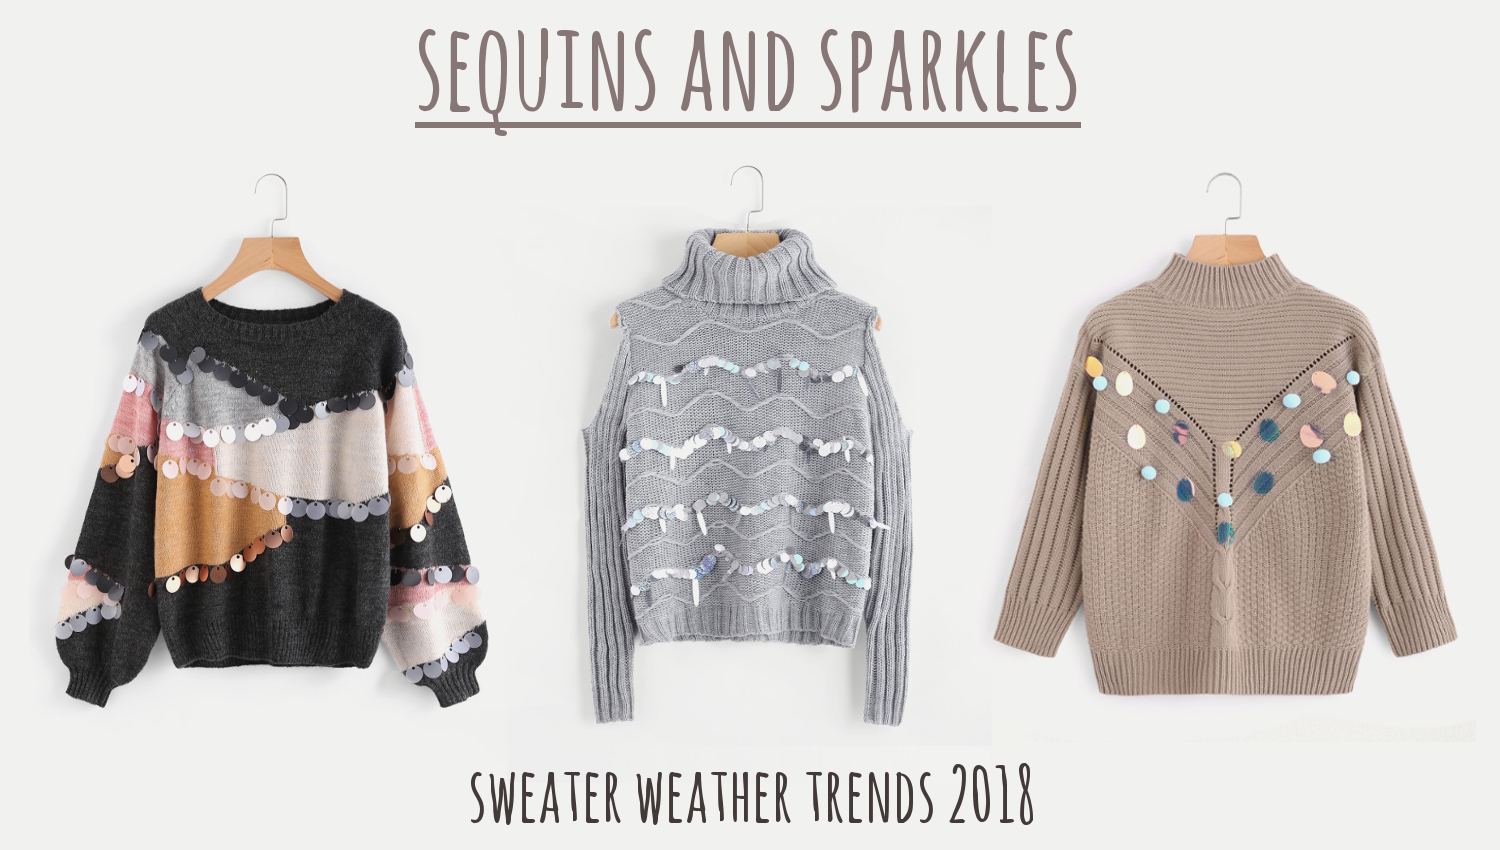 fashion collage with three trendy sequin sweaters for sweater weather season